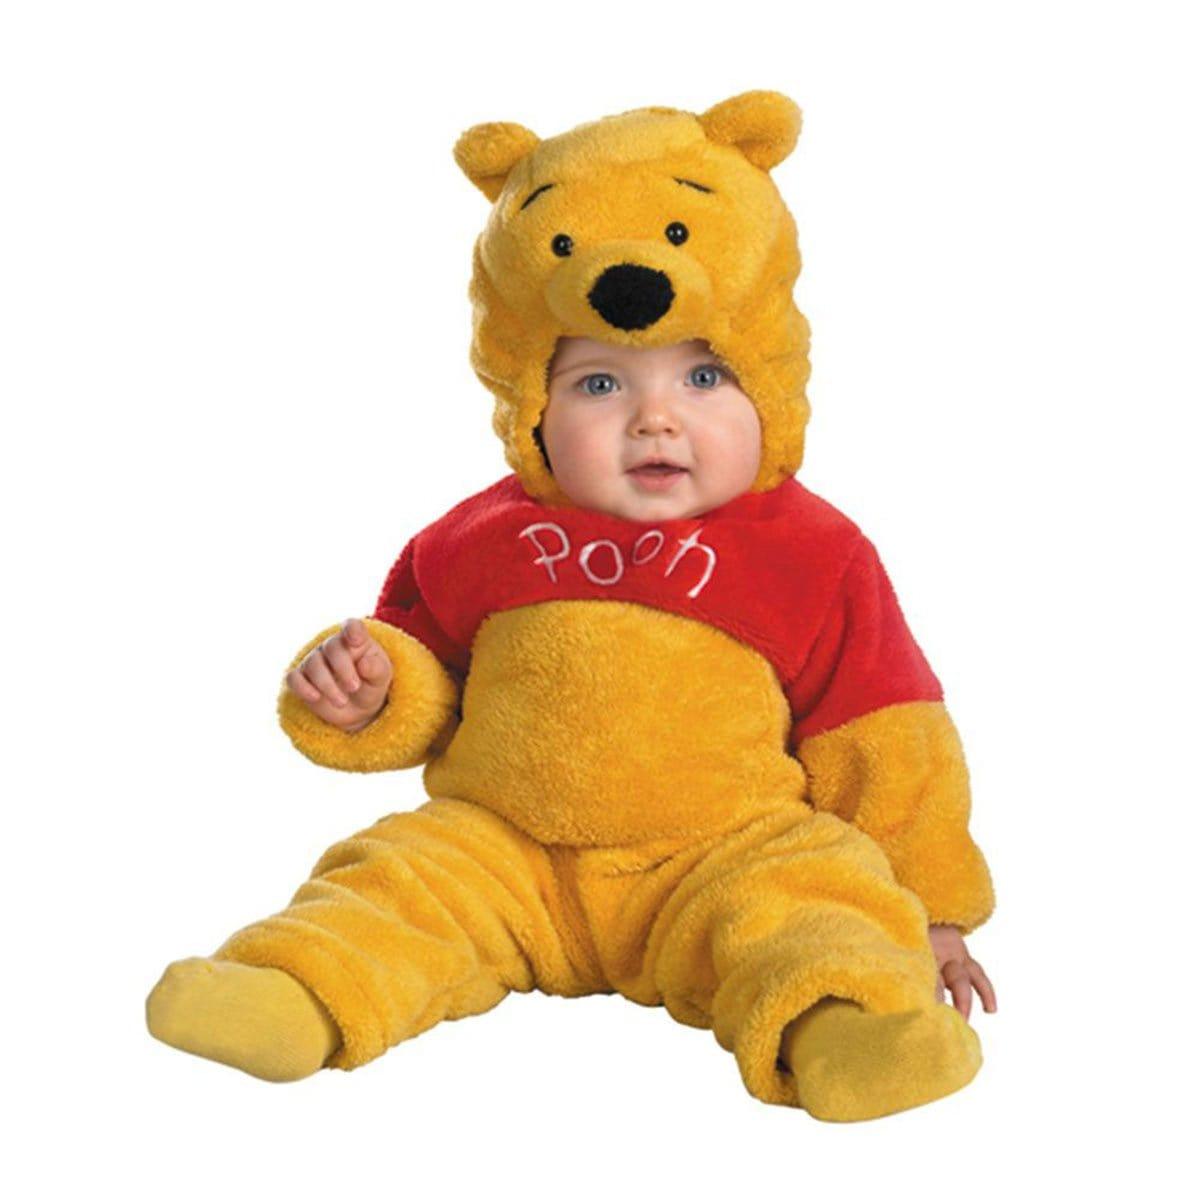 Buy Costumes Winnie The Pooh Deluxe Costume for Babies, Winnie The Pooh sold at Party Expert